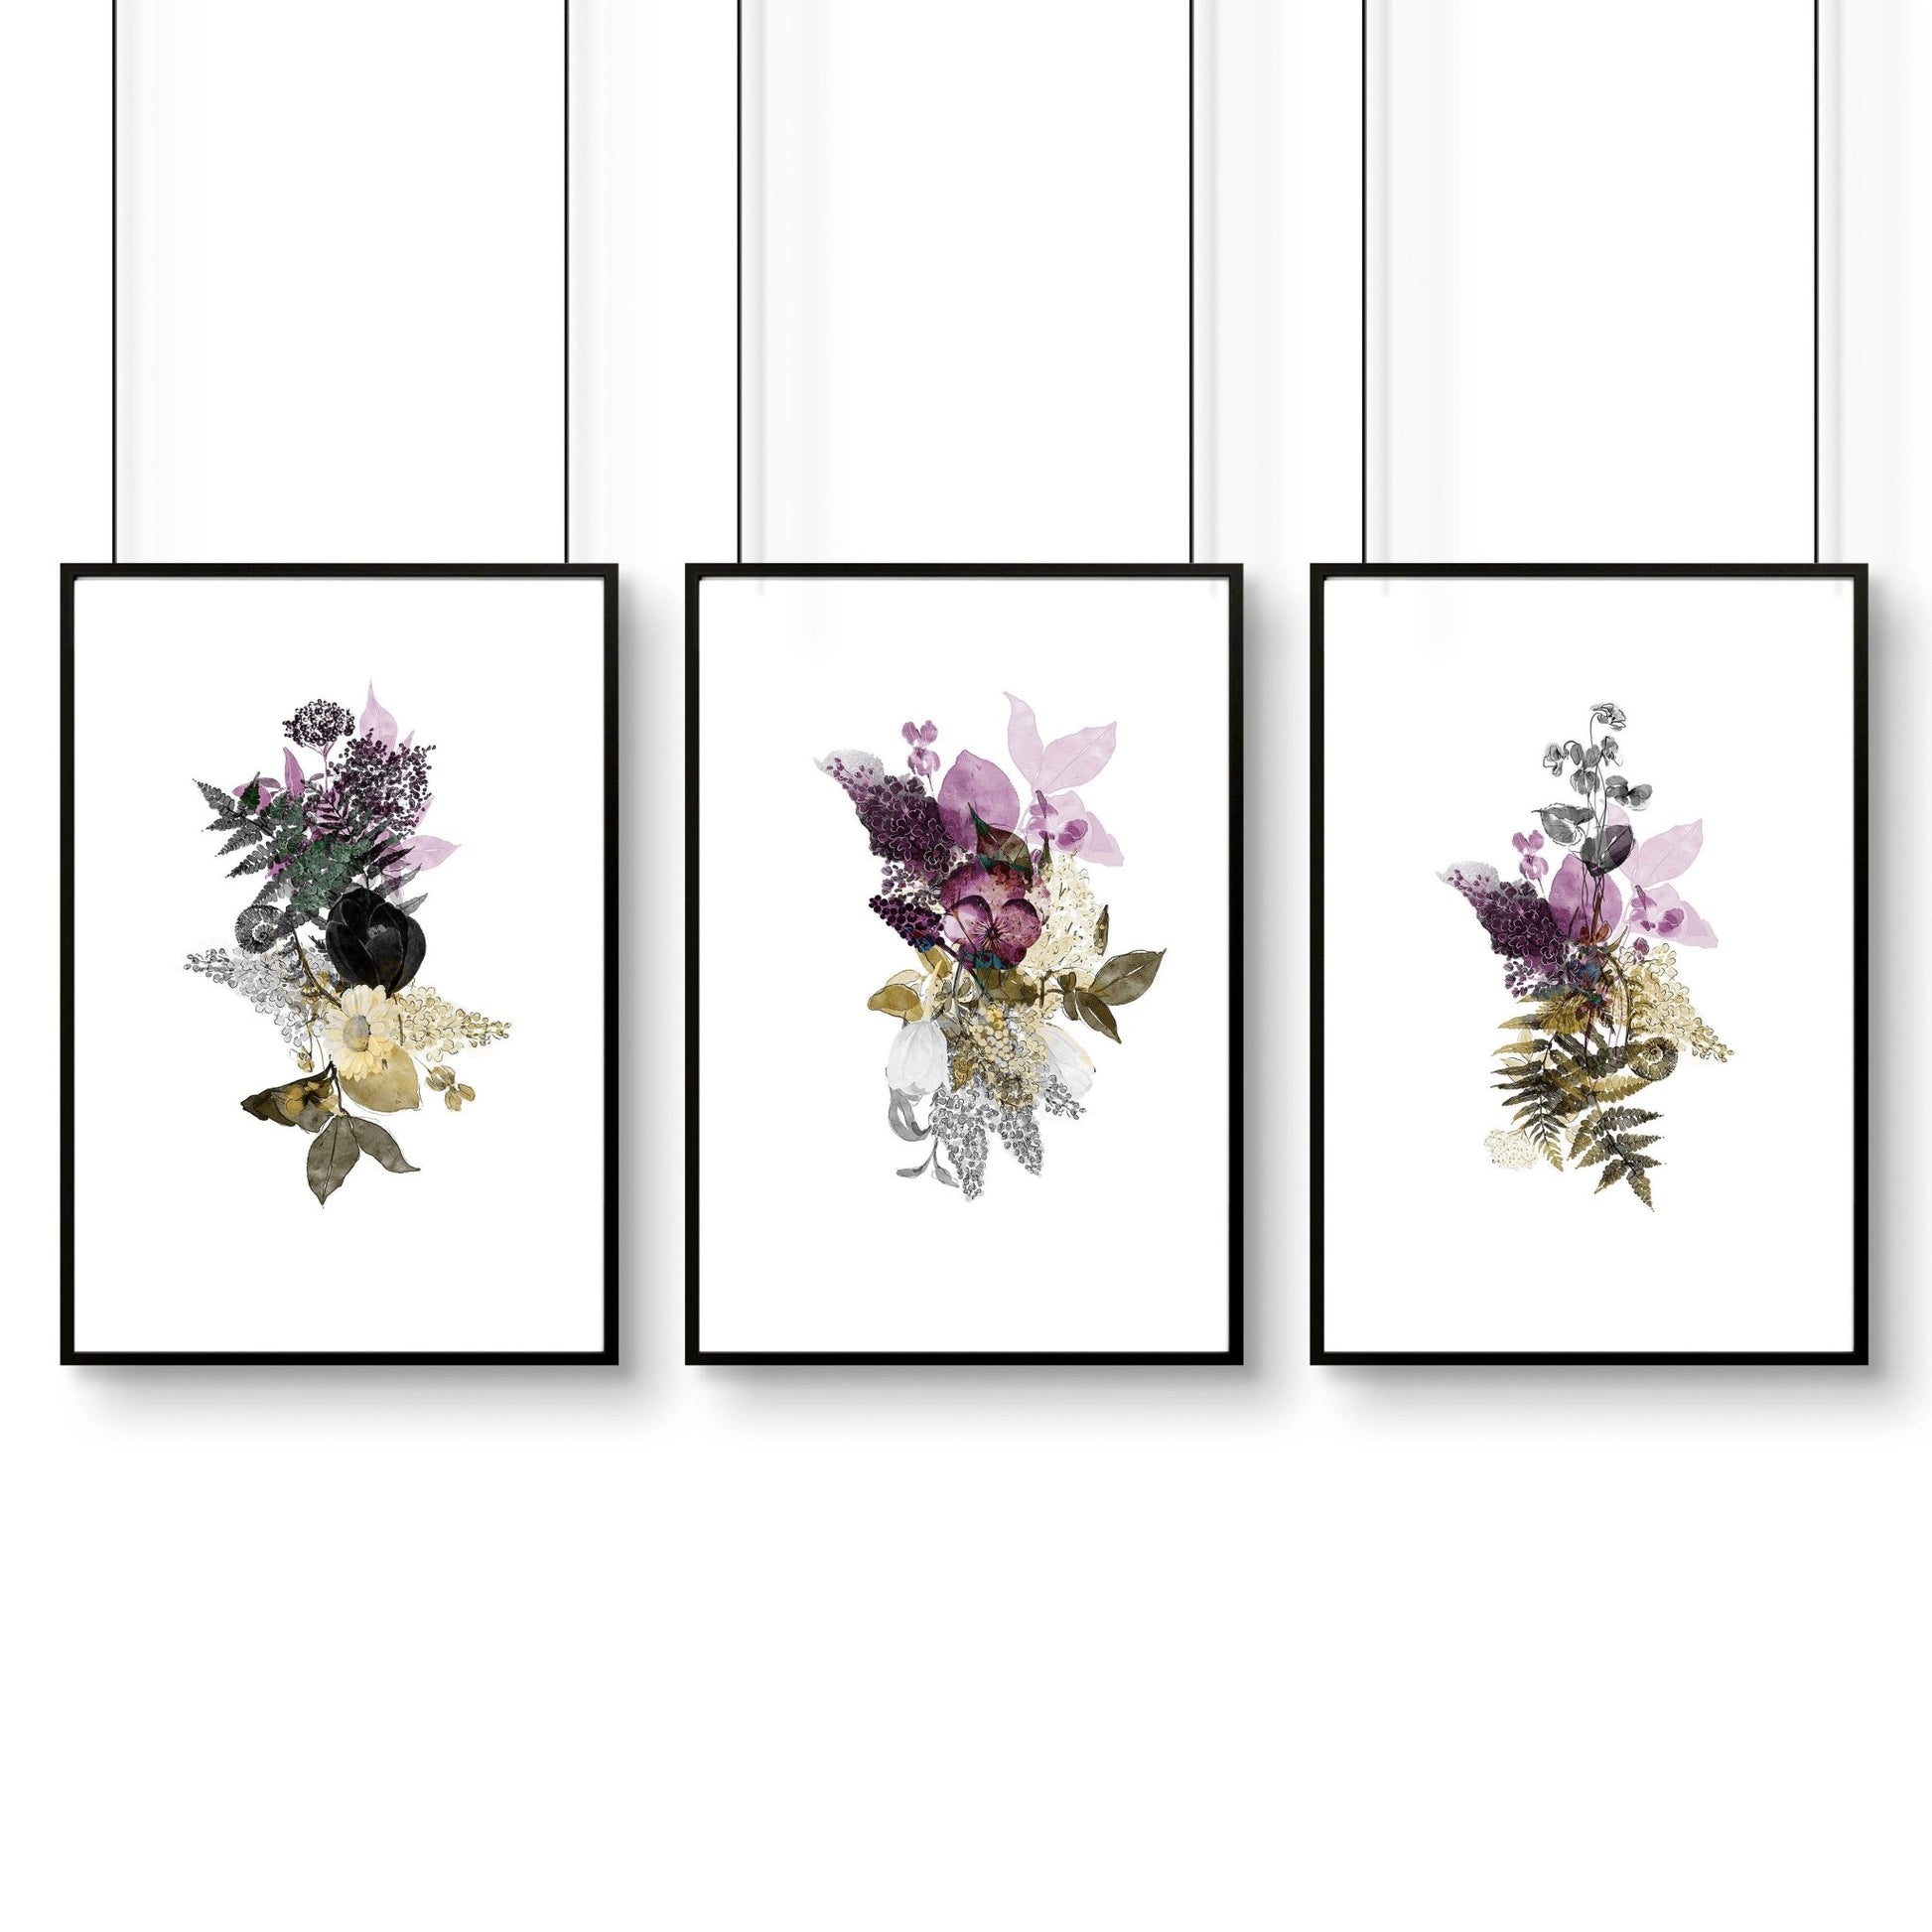 Large wall prints for a living room | set of 3 wall art prints